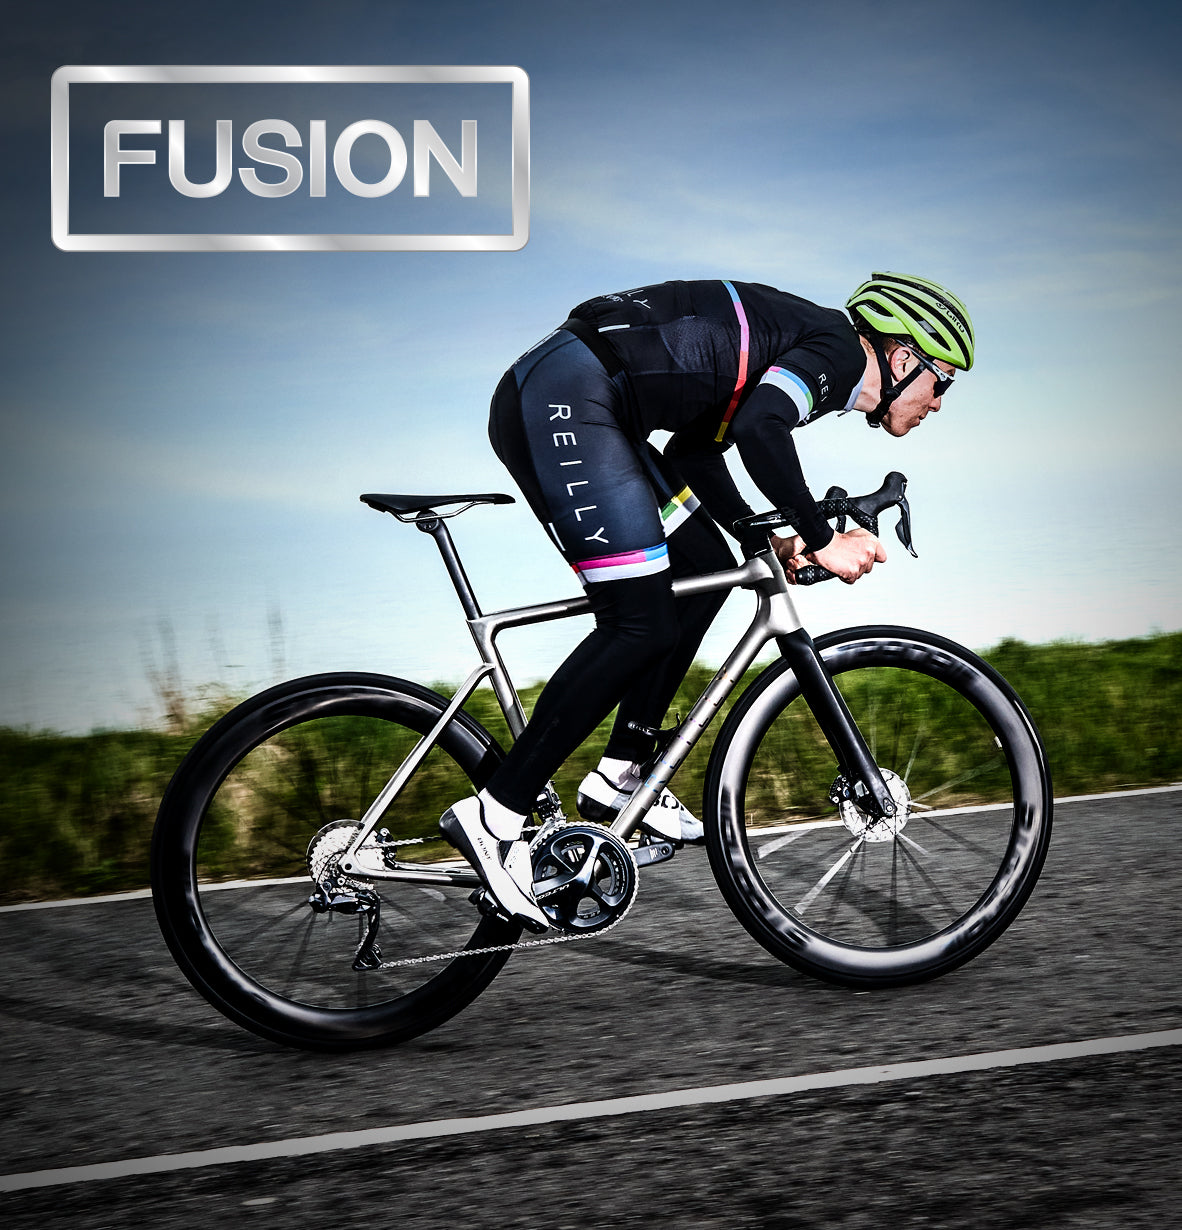 Side view of male cyclist going uphill on a titanium road bike. FUSION is written top left.